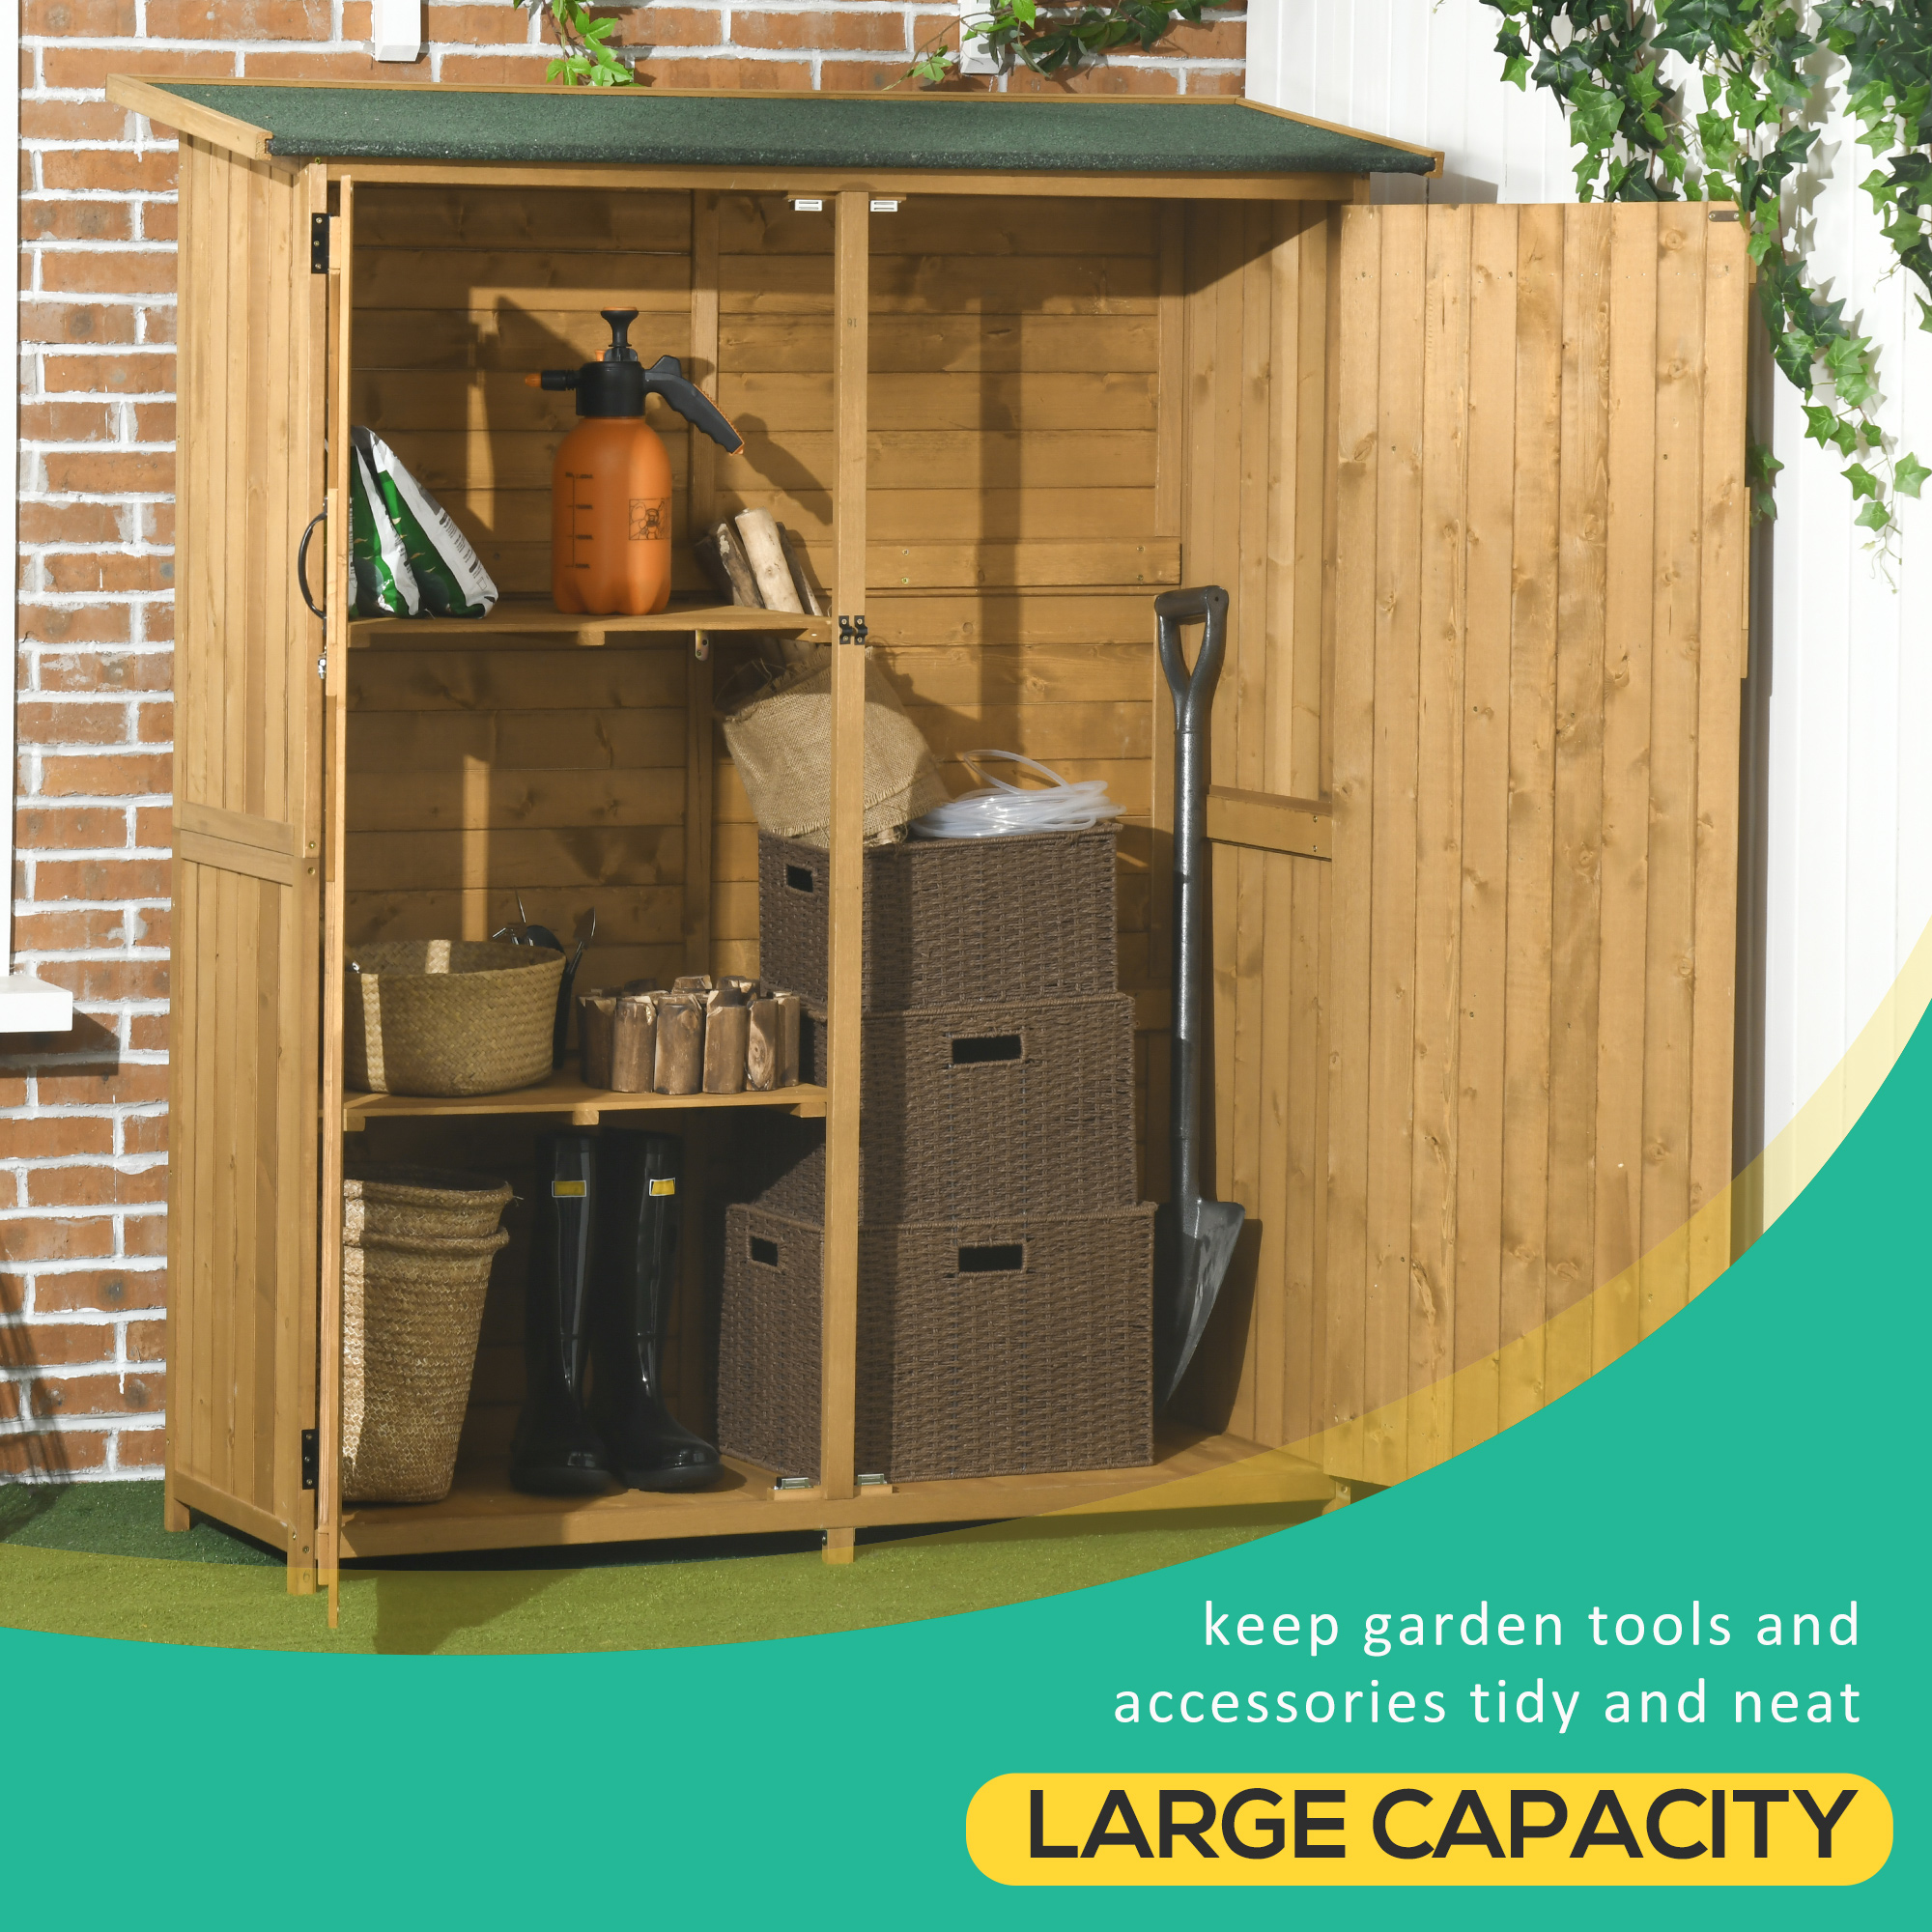 Outsunny Outdoor Storage Cabinet Wooden Garden Shed Utility Tool Organizer with Waterproof Asphalt Rood, Lockable Doors, 3 Tier Shelves for Lawn, Backyard, Natural - image 4 of 9